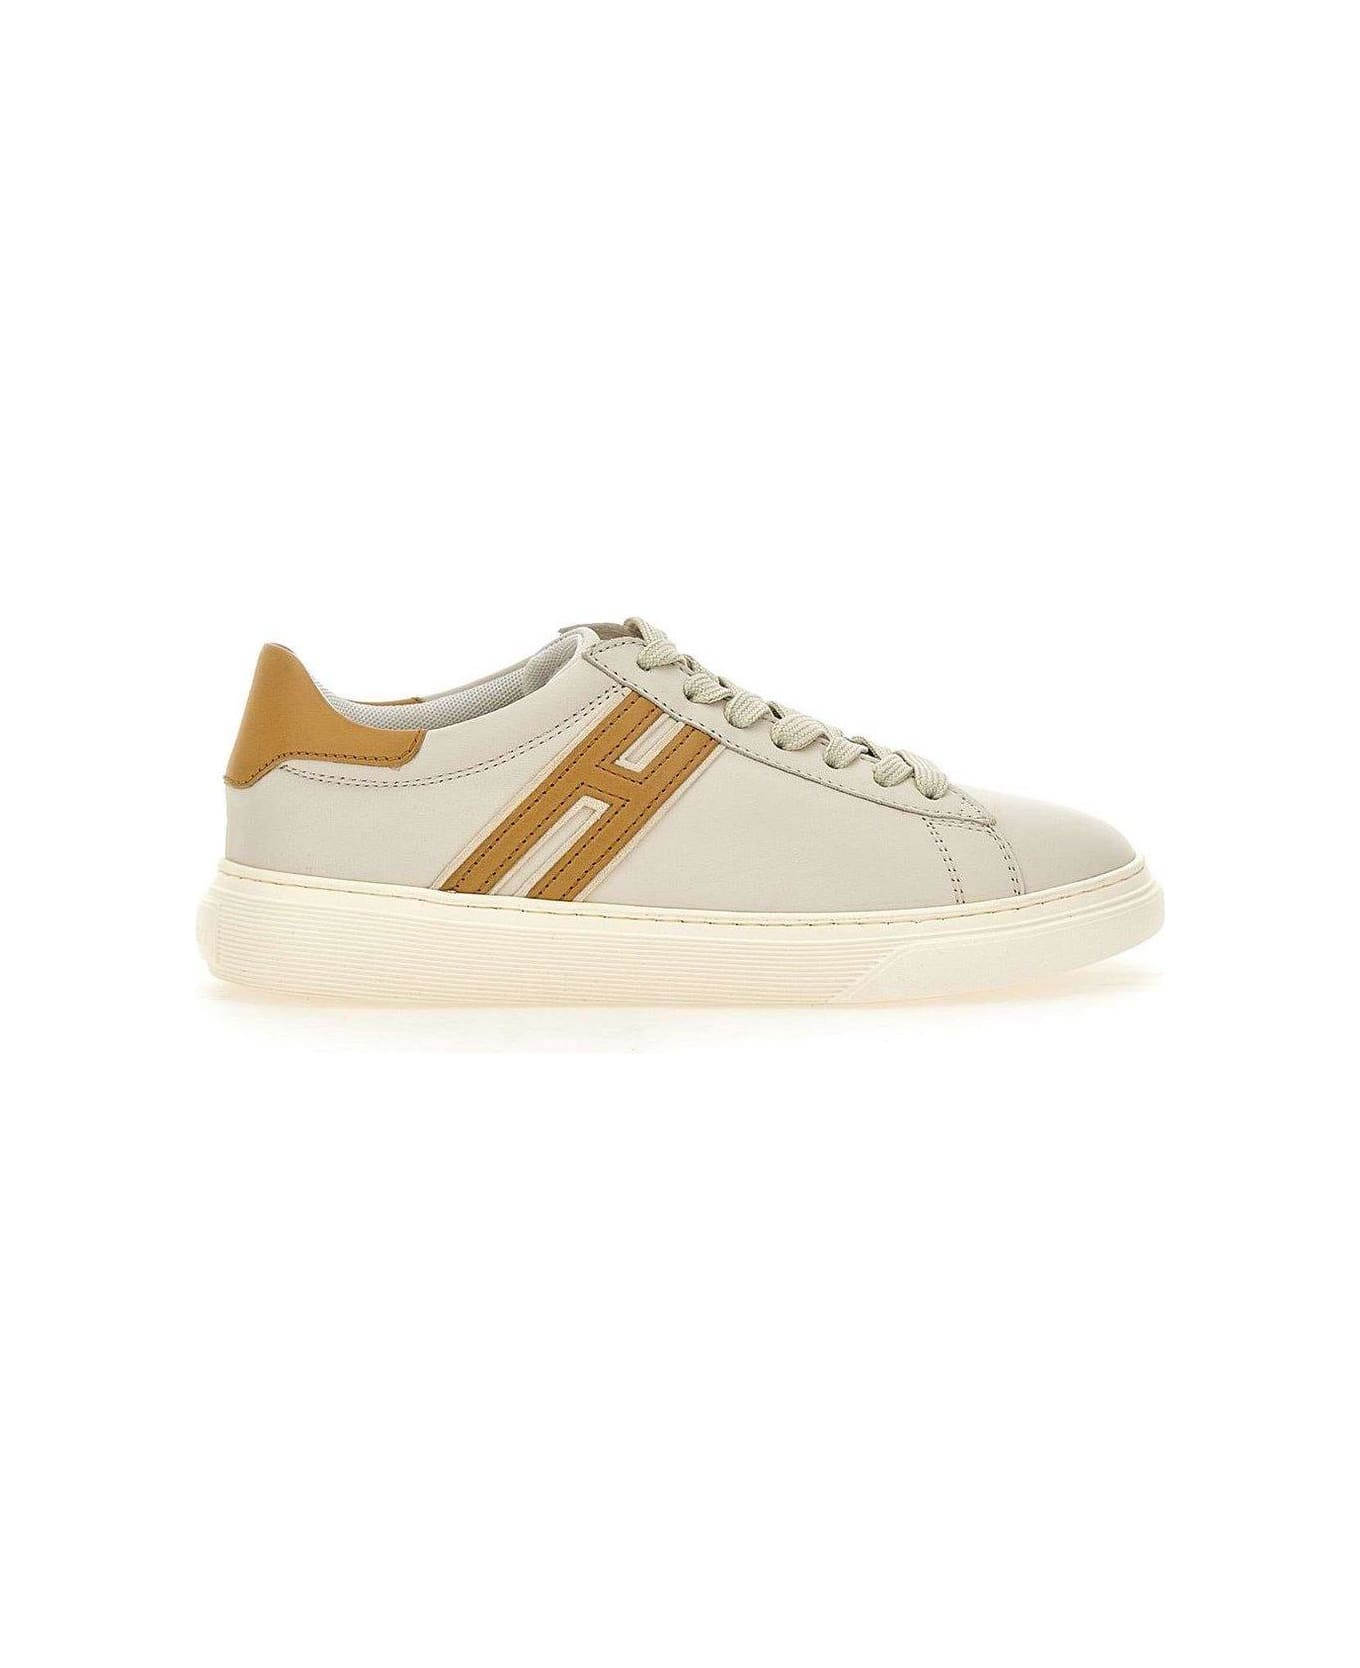 Hogan H365 Lace-up Sneakers - White スニーカー